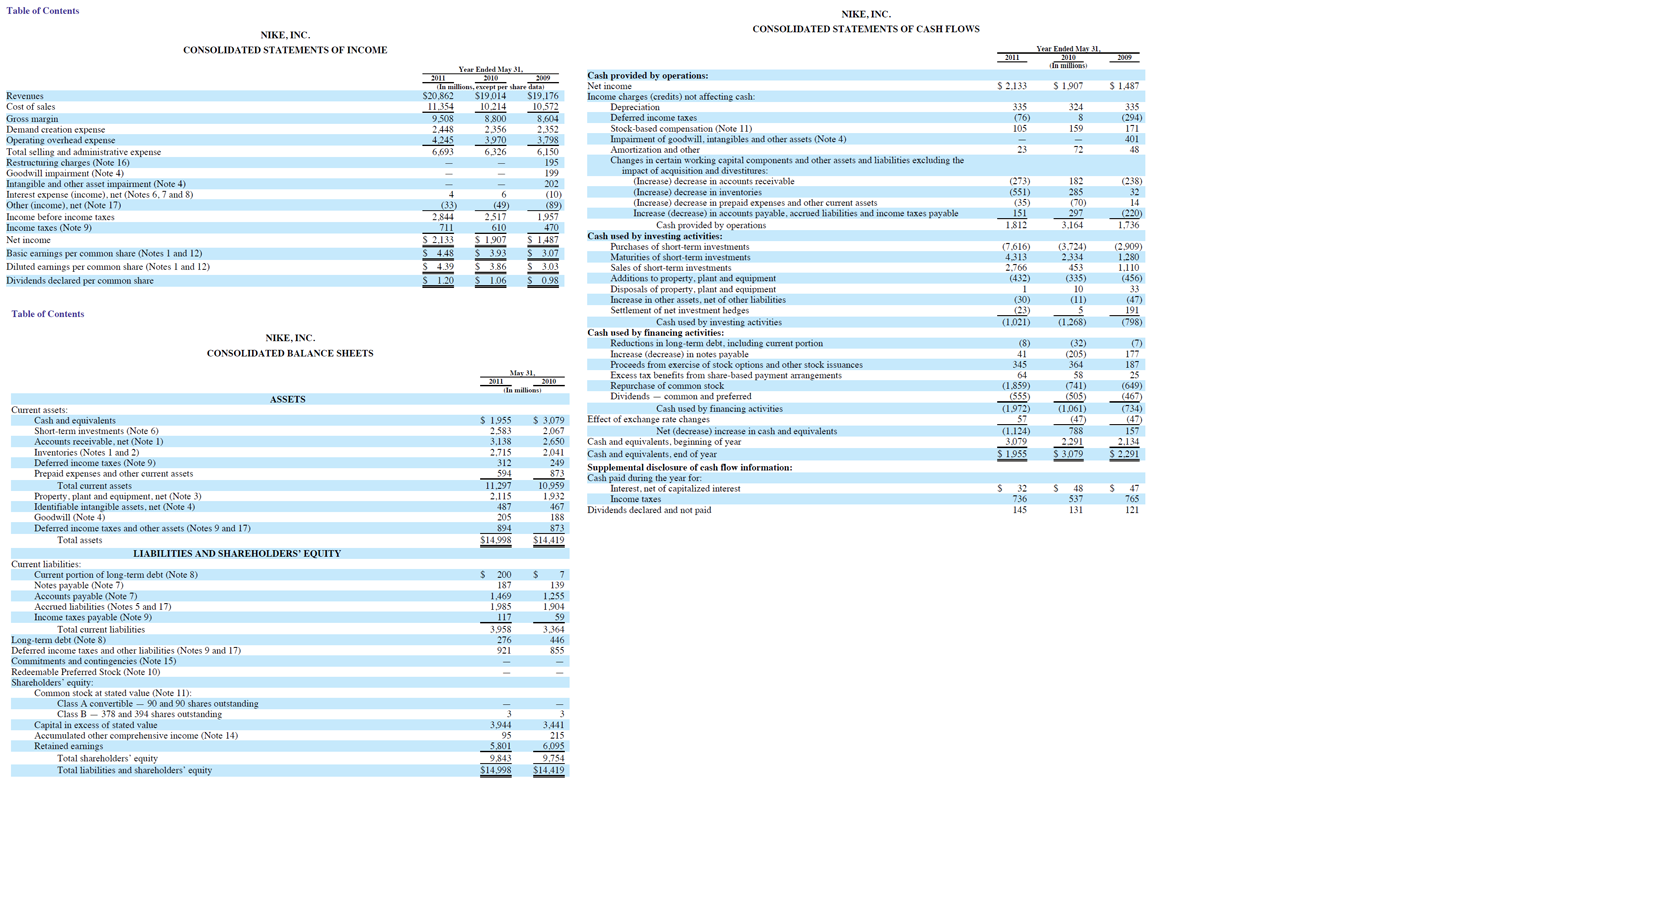 NIKE INC FORM 10-K Annual Report) Filed 07/22/11 for |